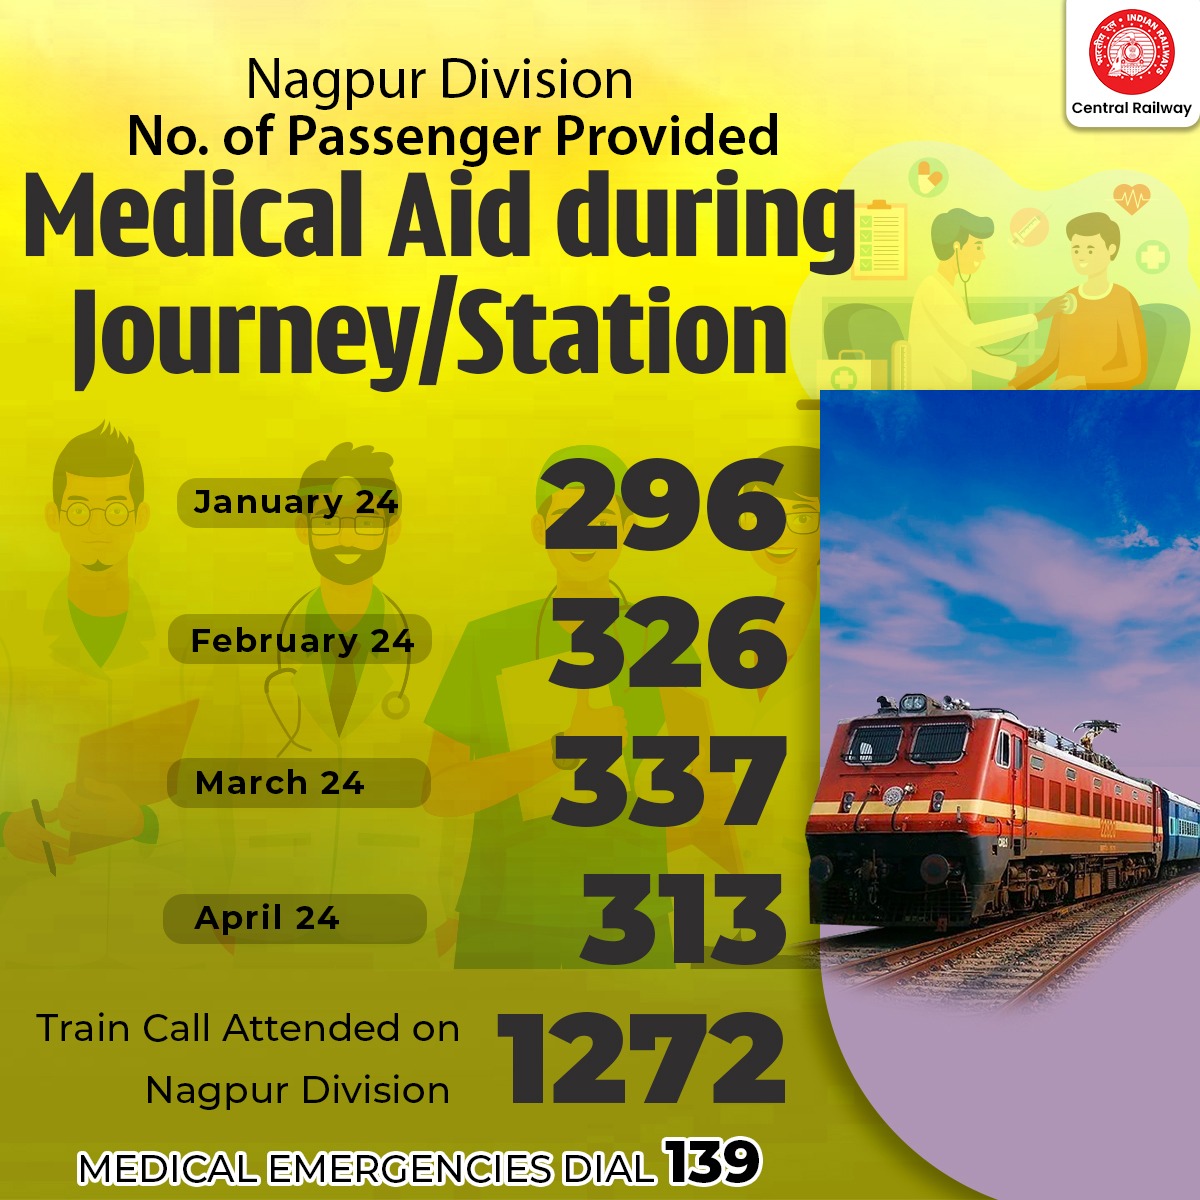 Central Railway Nagpur Division prioritizes passenger safety with swift medical aid during journeys and at stations. With trained professionals, they've addressed 1,272 medical needs in 2024.

#PassengerSafety
#MedicalAid 
#NagpurDivision